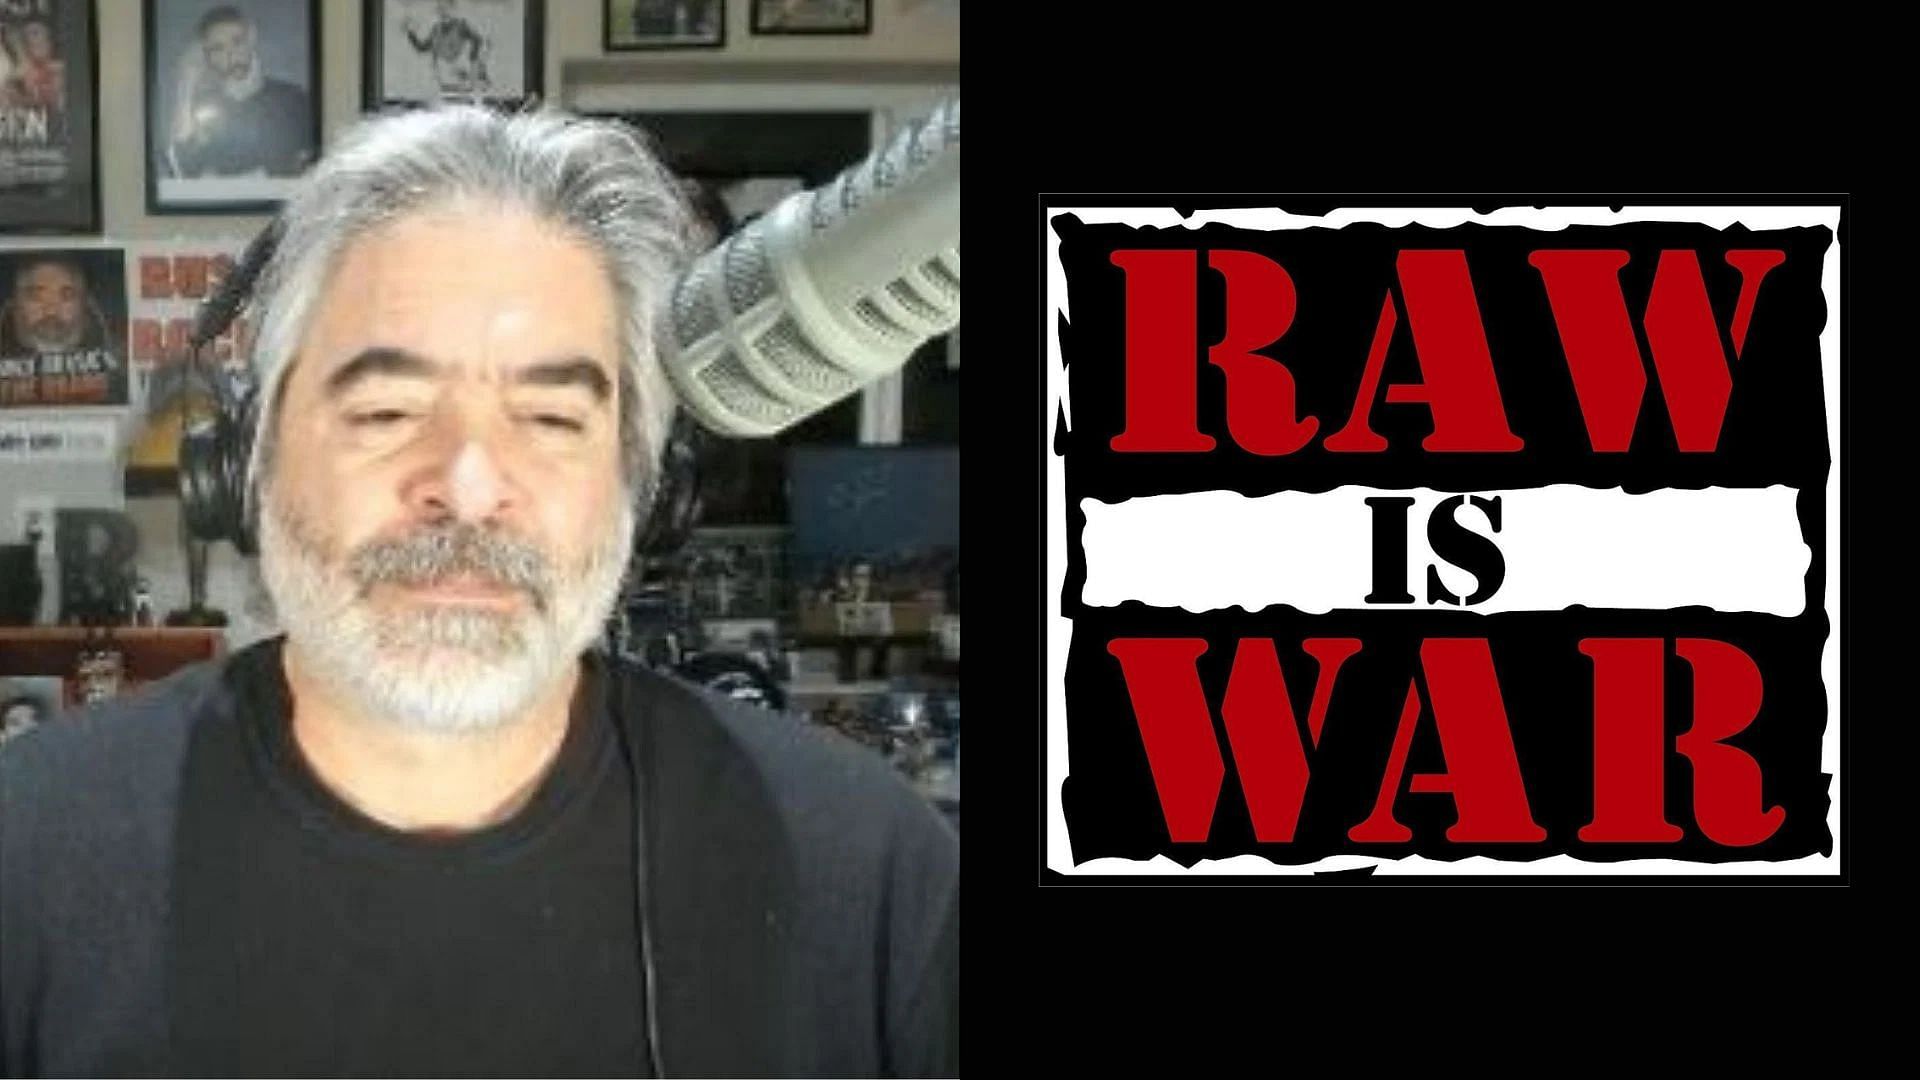 Vince Russo was the lead writer of RAW in the late 1990s